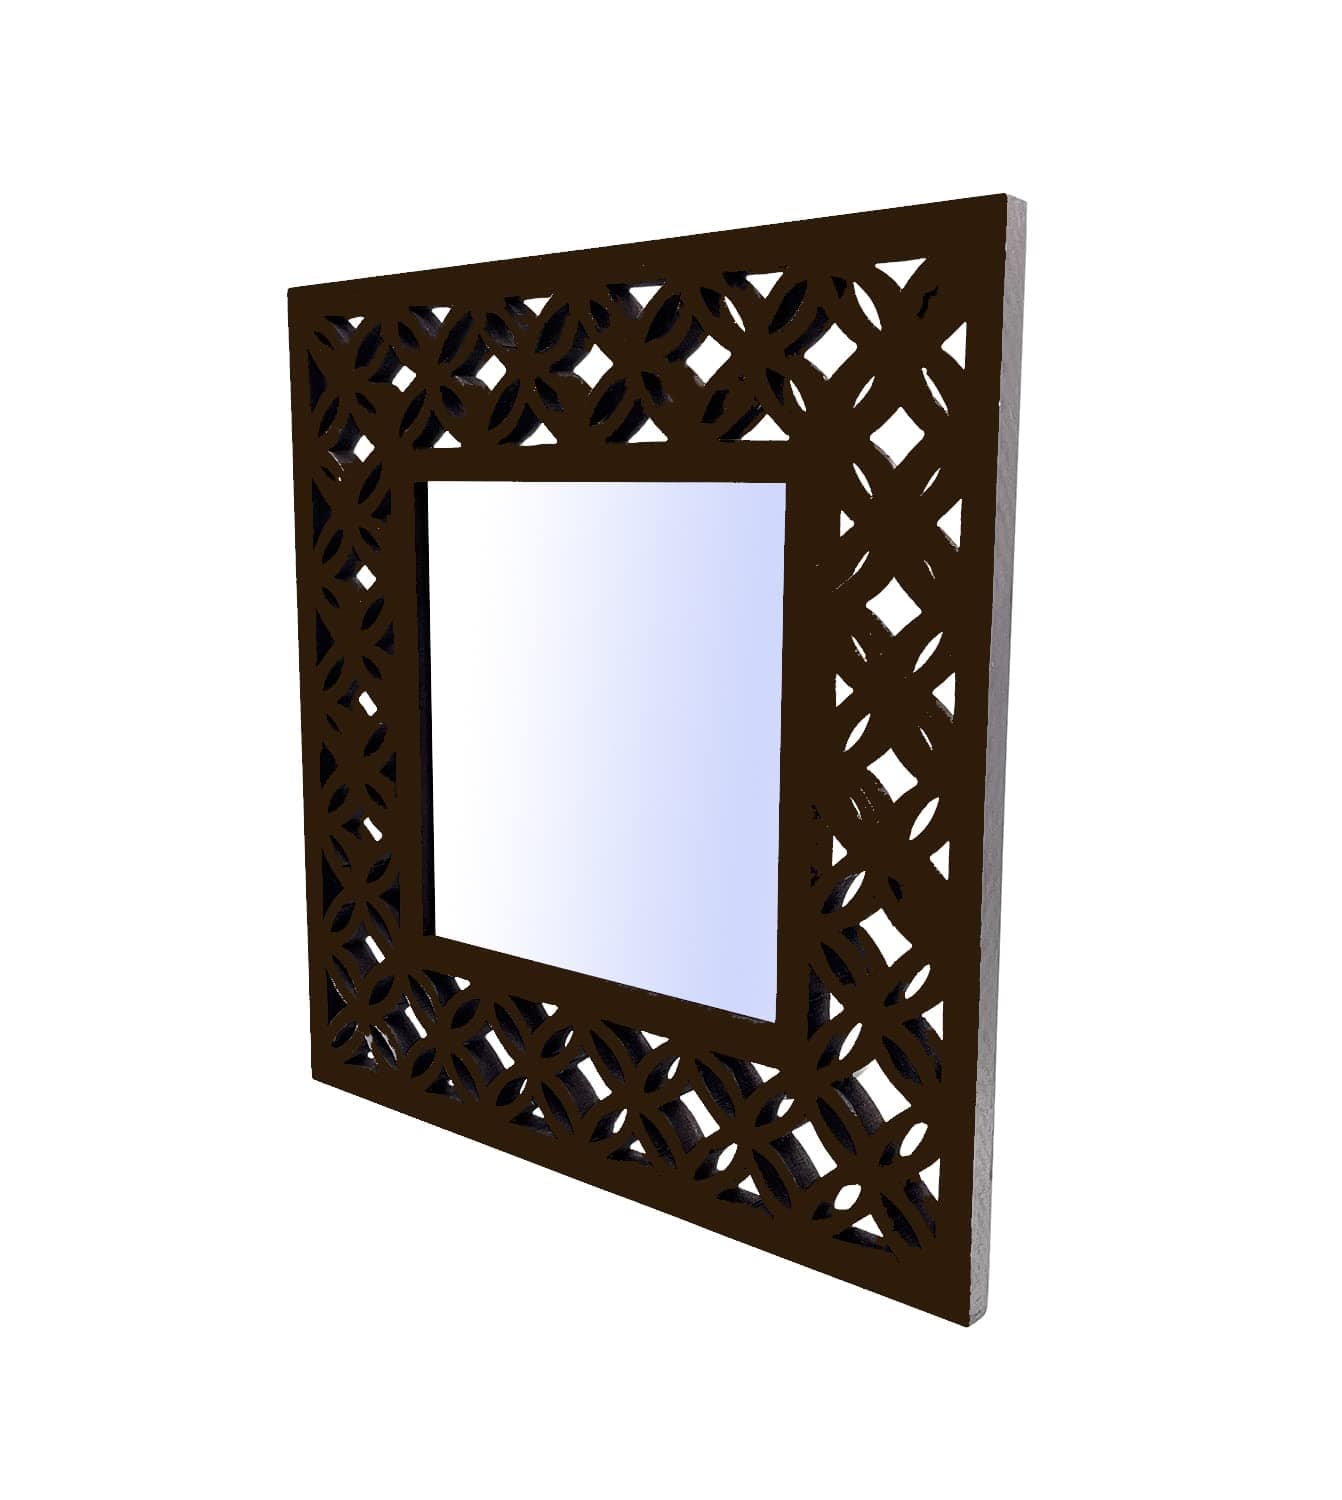 Decorative & Hand Crafted Wooden Wall Mirror in Walnut Finish ( 45 x 45 cm)